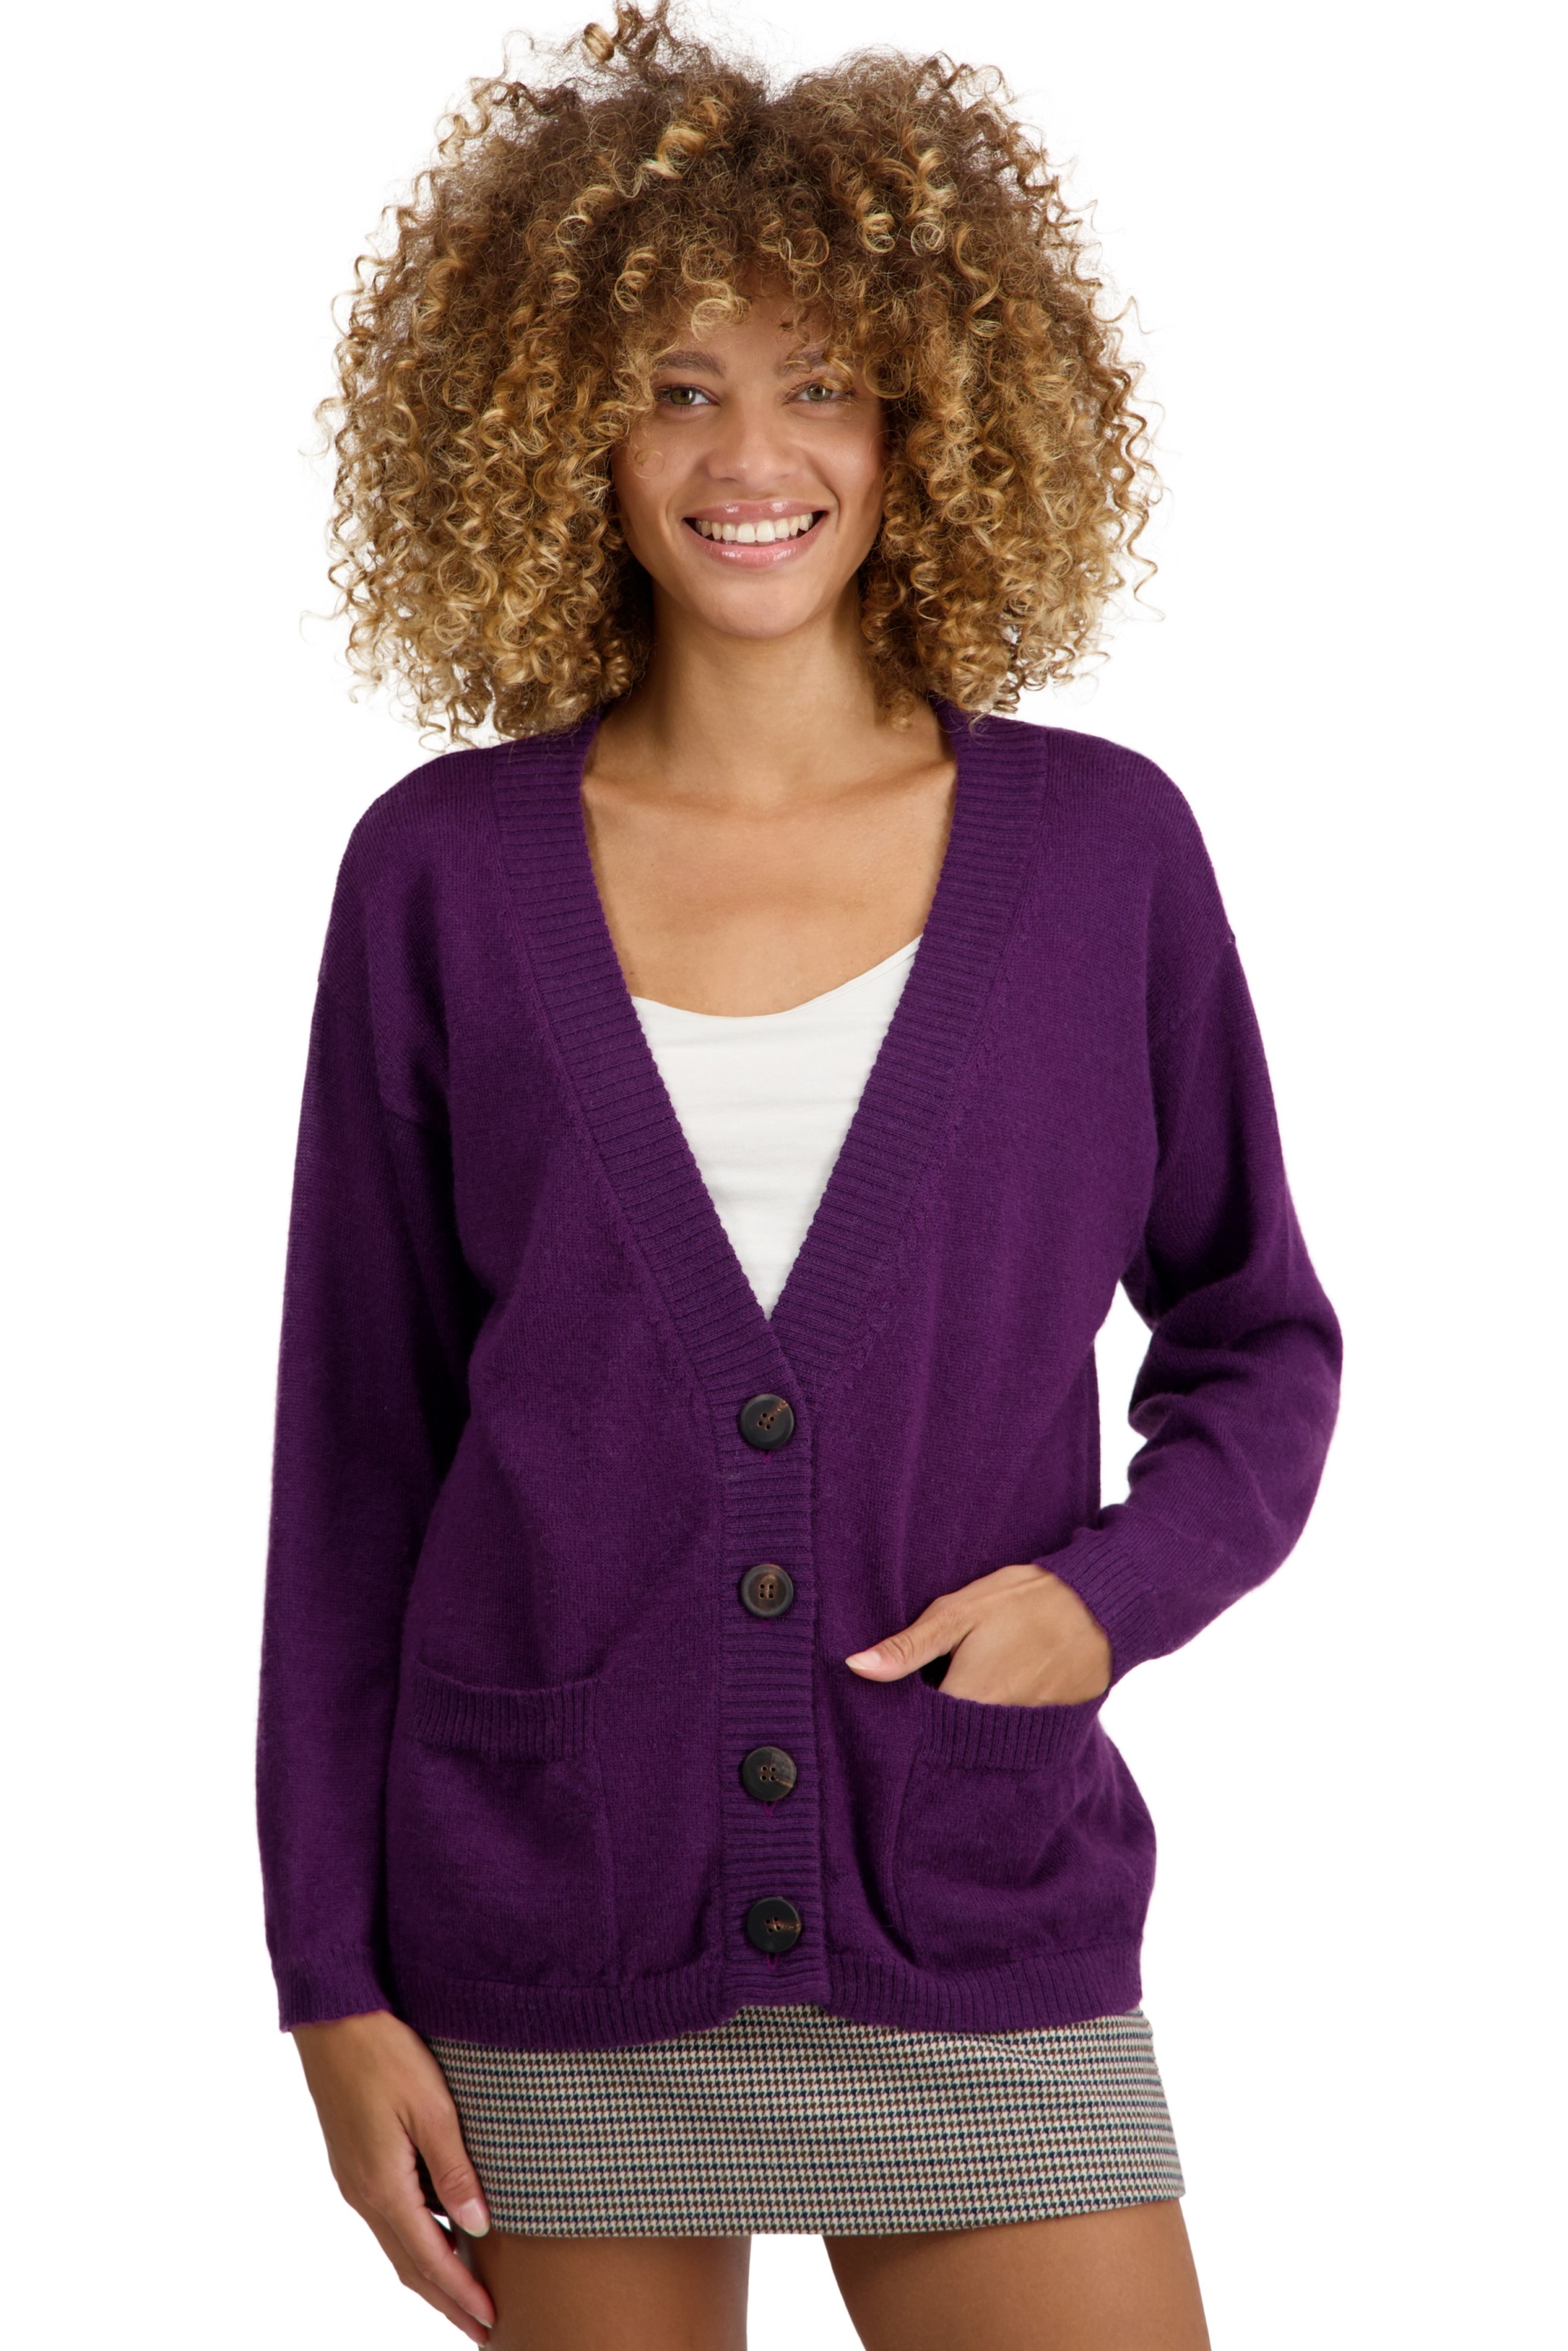 Baby Alpaga pull femme toulouse violet 2xl